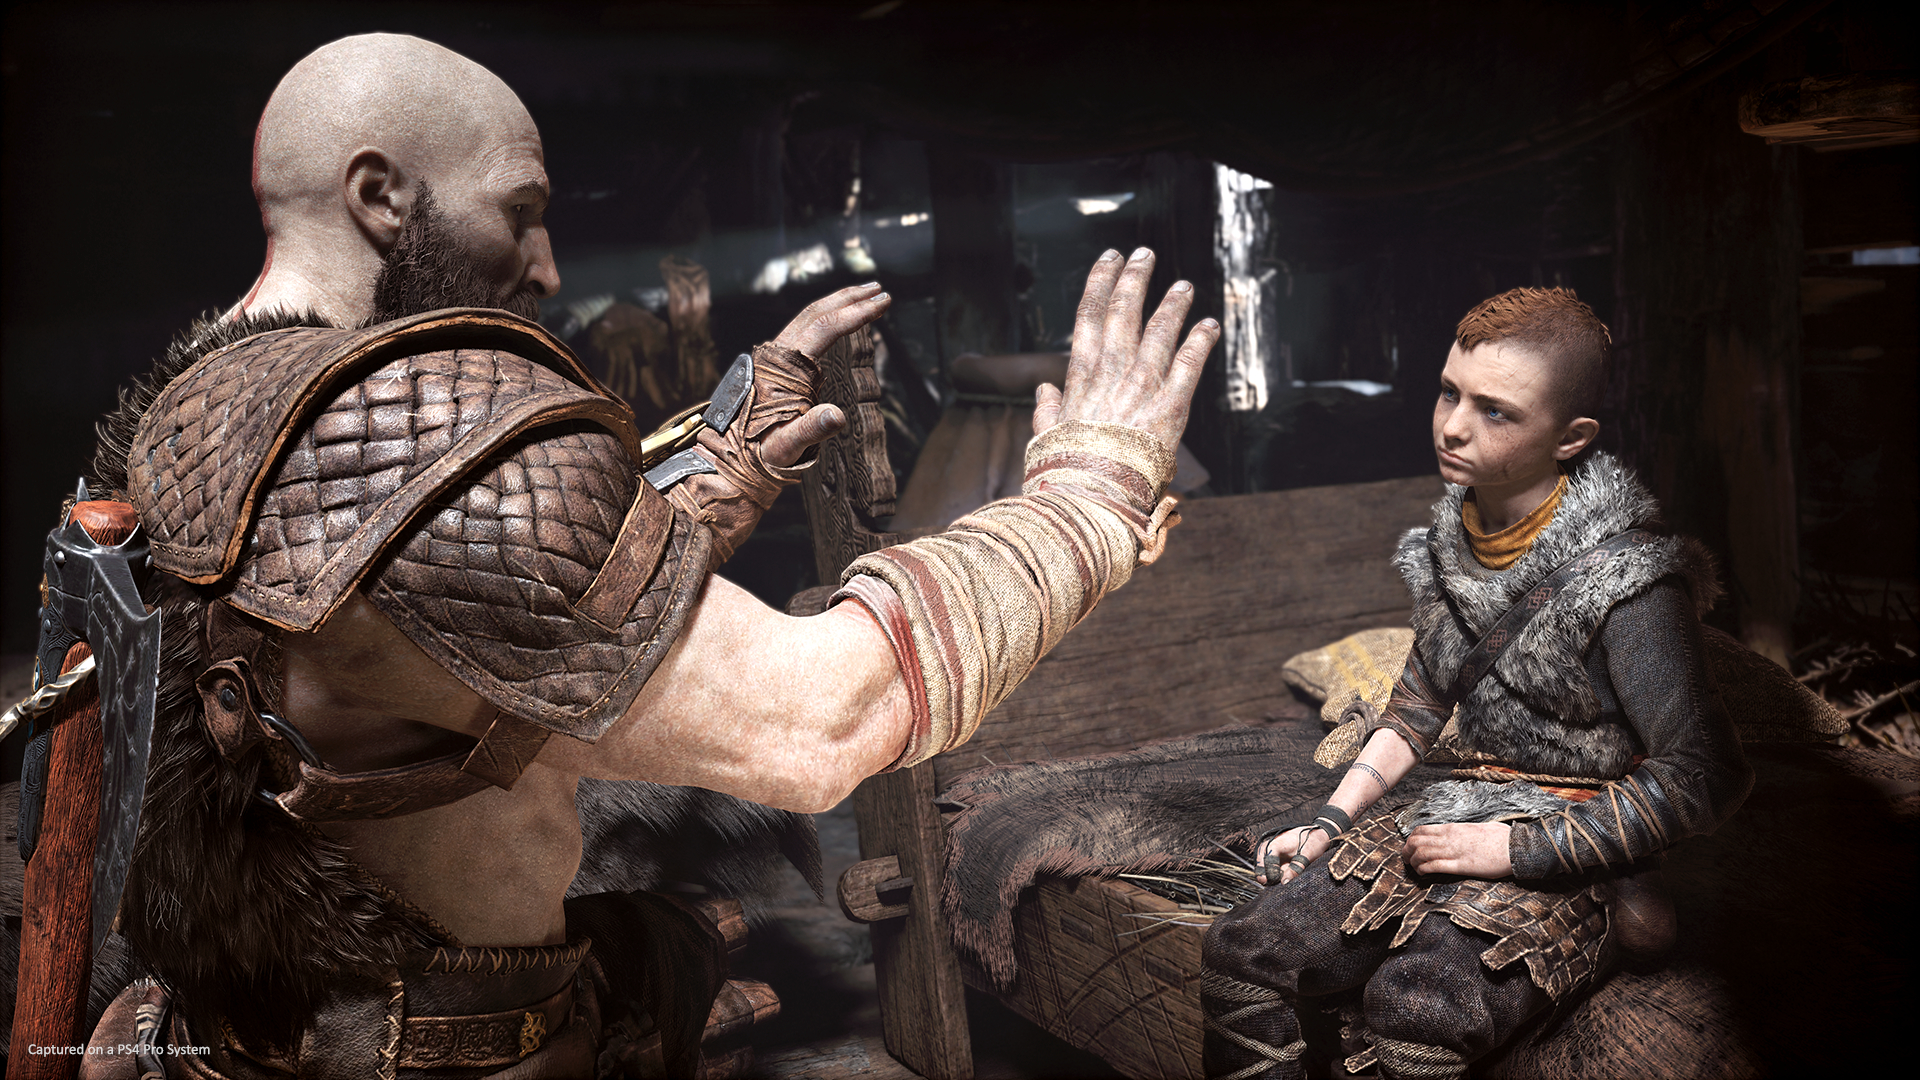 God of War Hands-on Preview | Kratos telling a story to Atreus